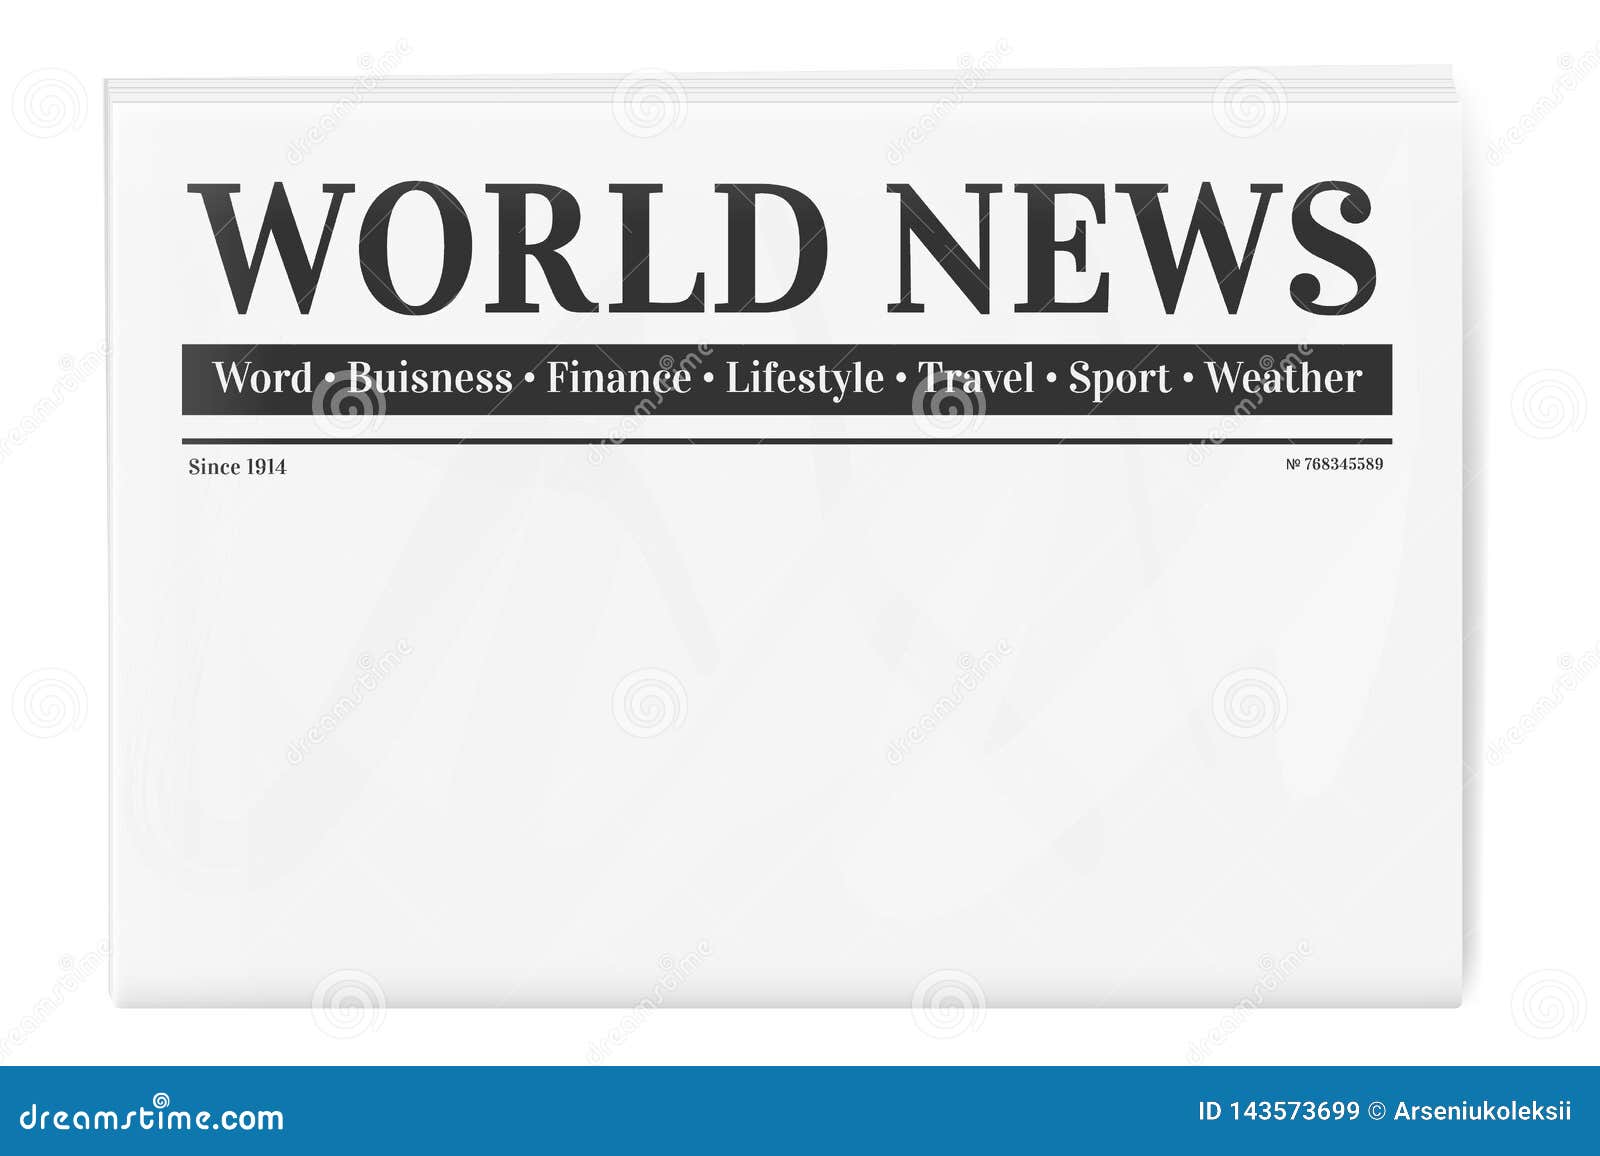 Blank Newspaper Template White Background Stock Illustrations Throughout Blank Newspaper Template For Word